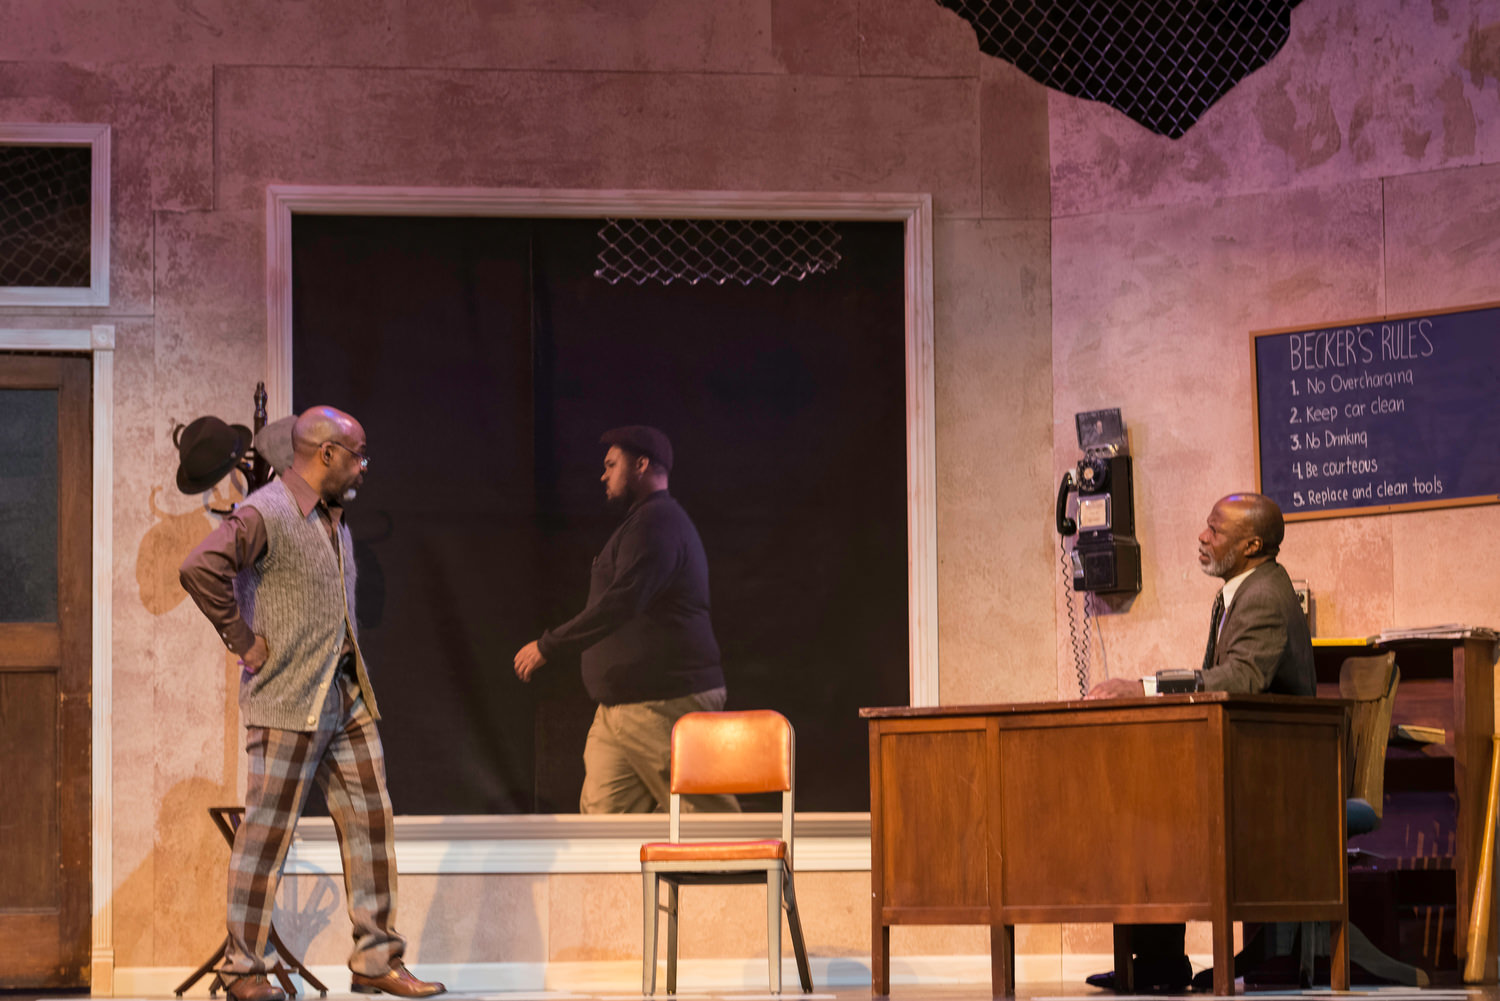 ShawnJ West (Turnbo), Jonathan Smothers (Doub) and L. Peter Callender (Becker) in African-American Shakespeare Company’s production of August Wilson’s ‘Jitney’, directed by L. Peter Callender; photo credit: Lance Huntley